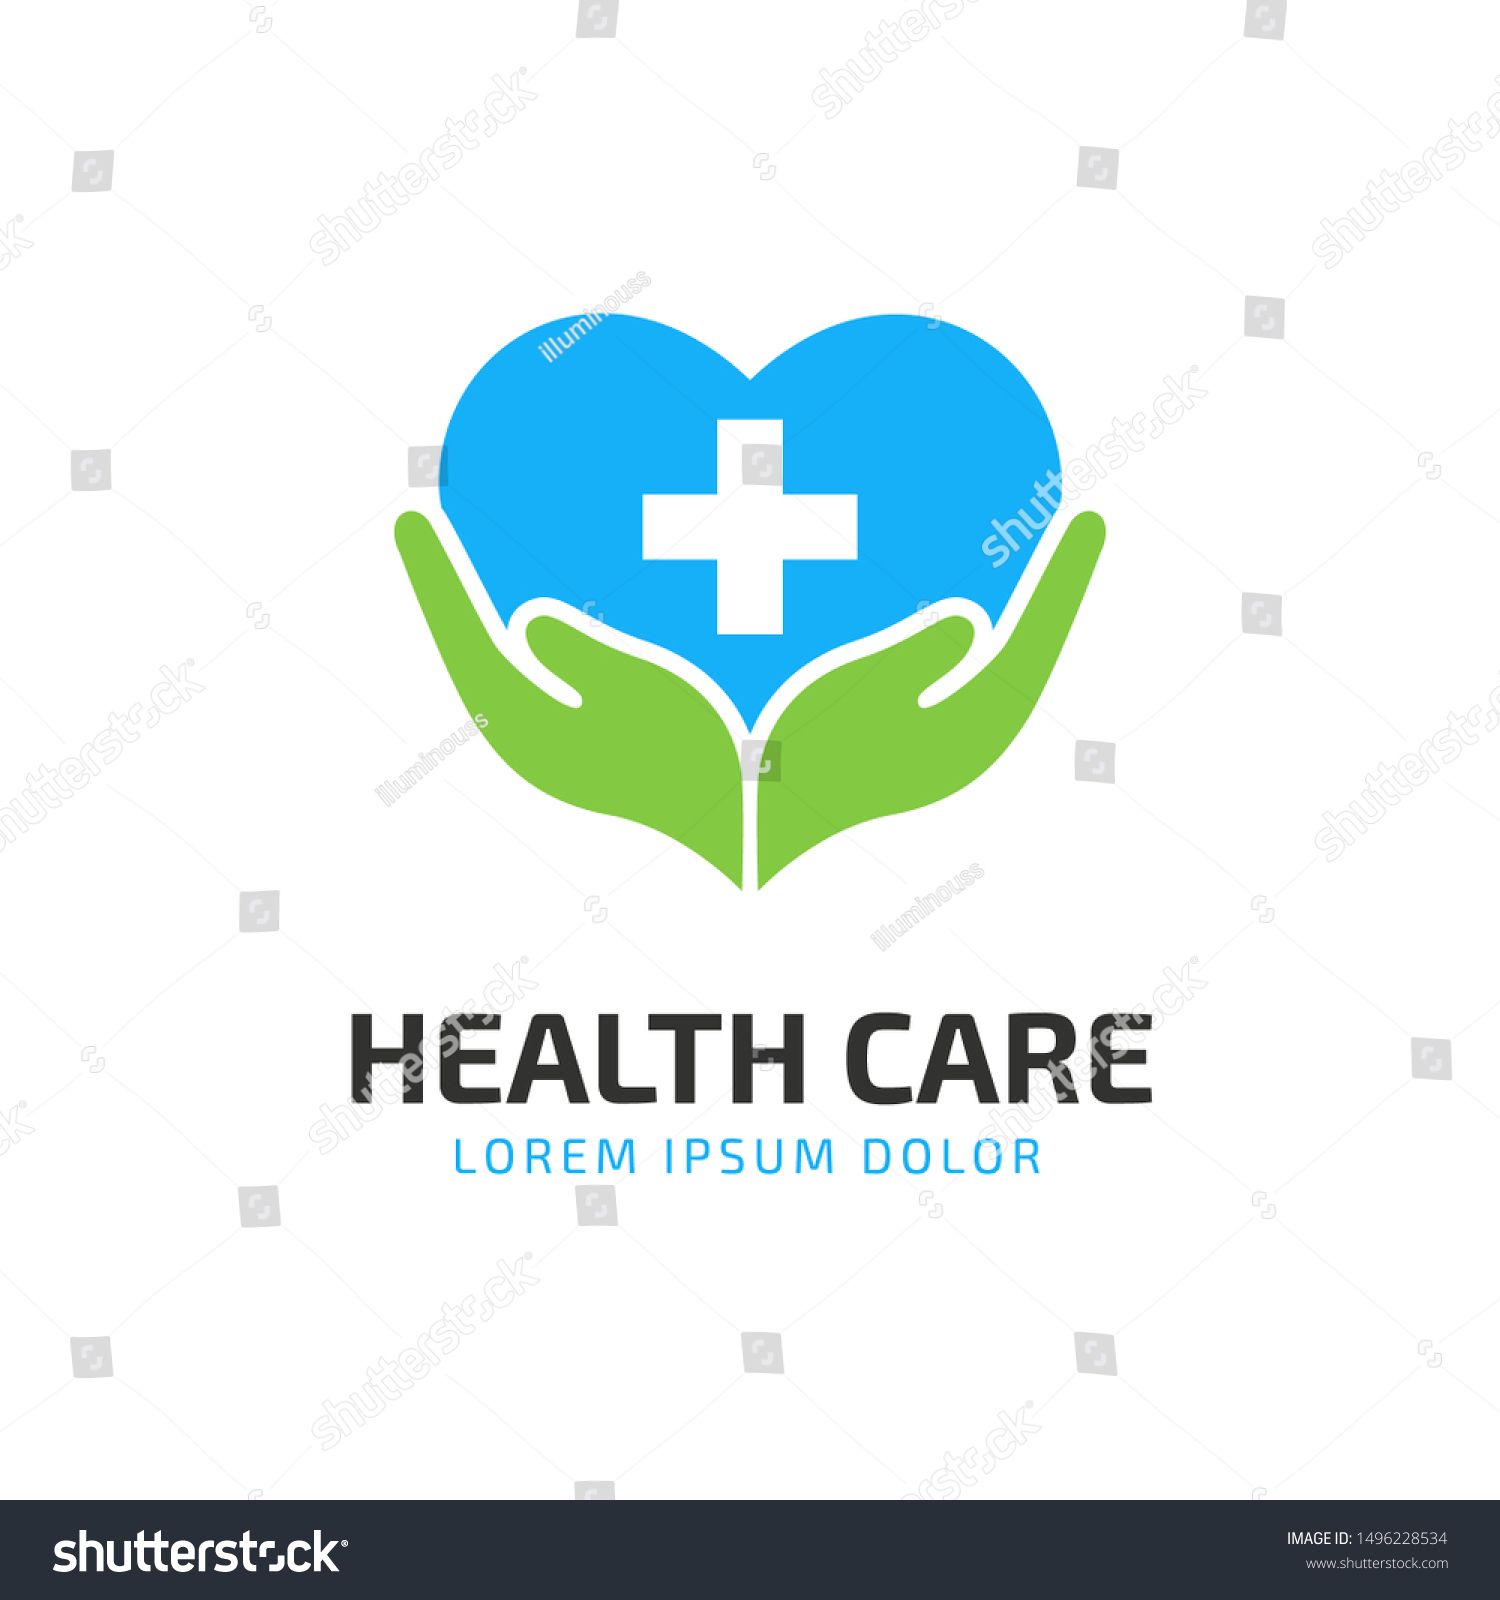 387,340 Medical health care logo Images, Stock Photos & Vectors ...